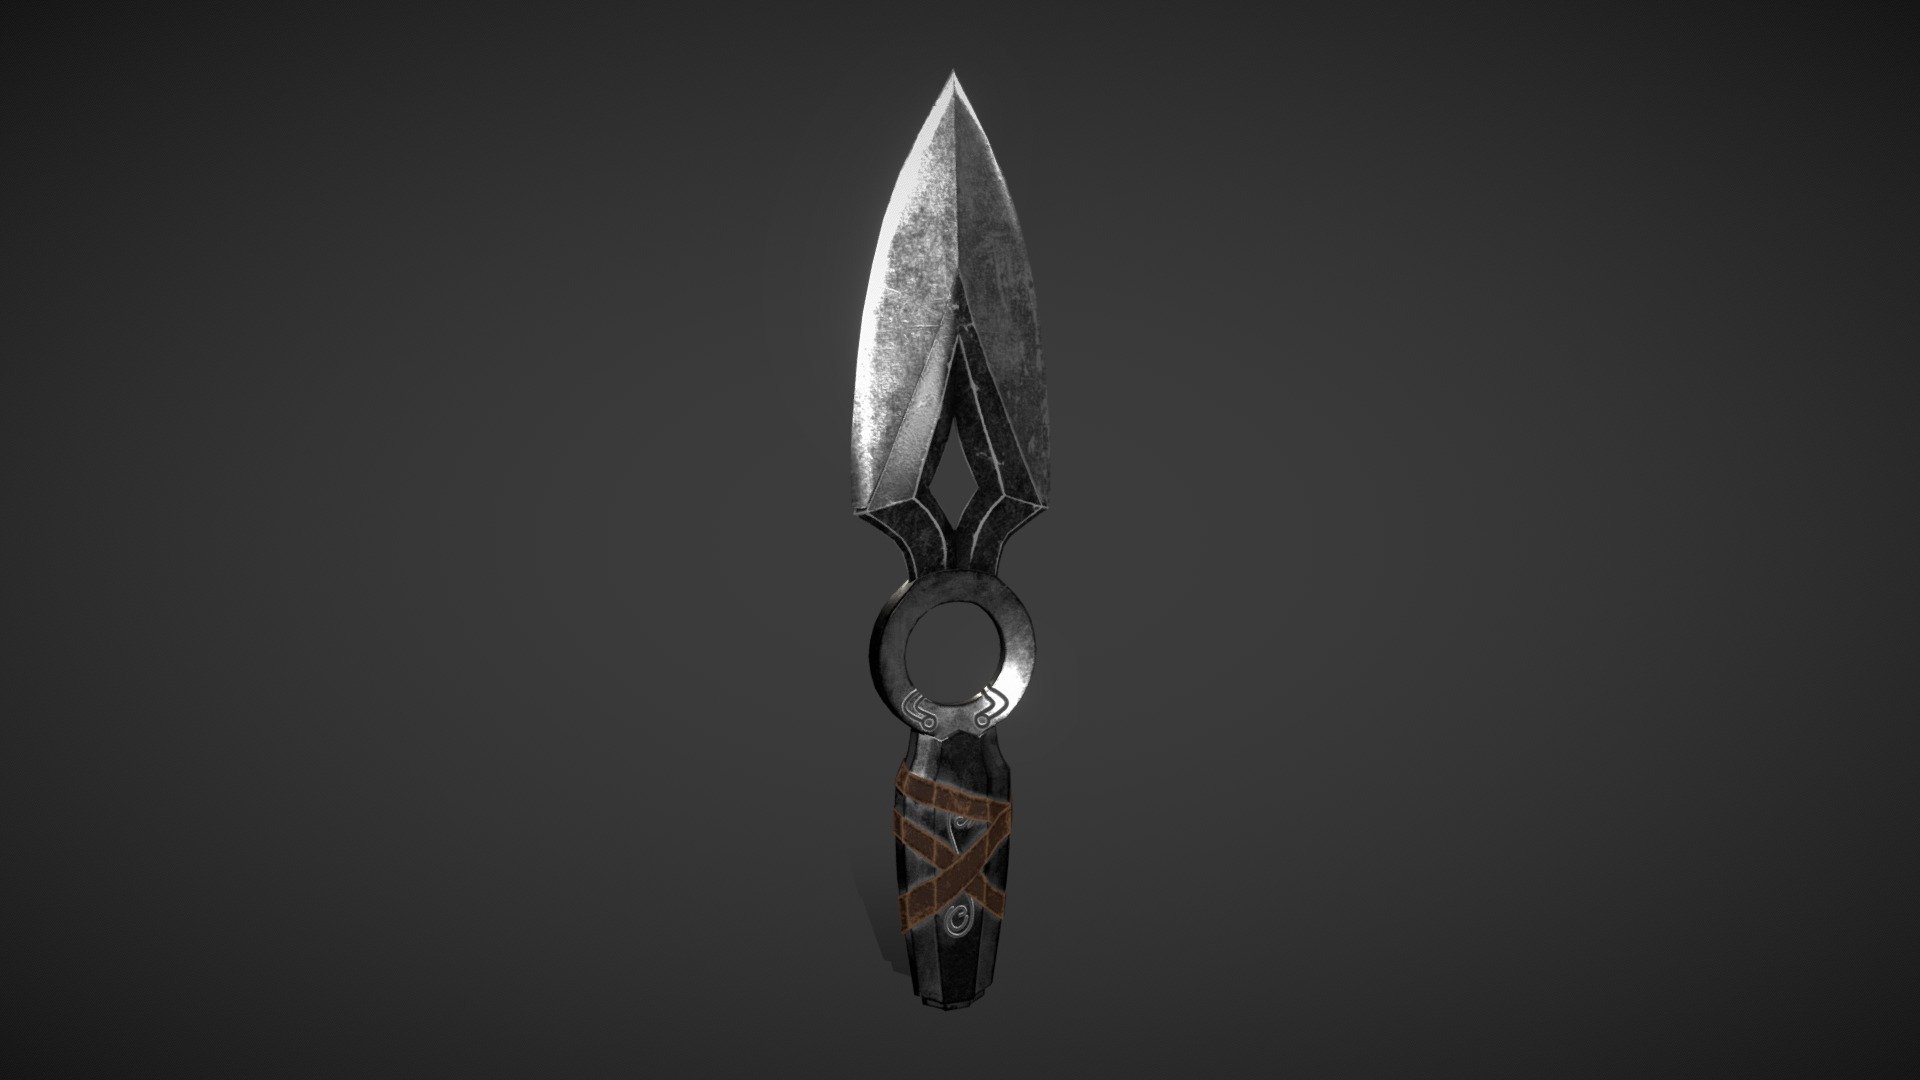 Modelled in Maya, texture made in Substance Painter 3d model